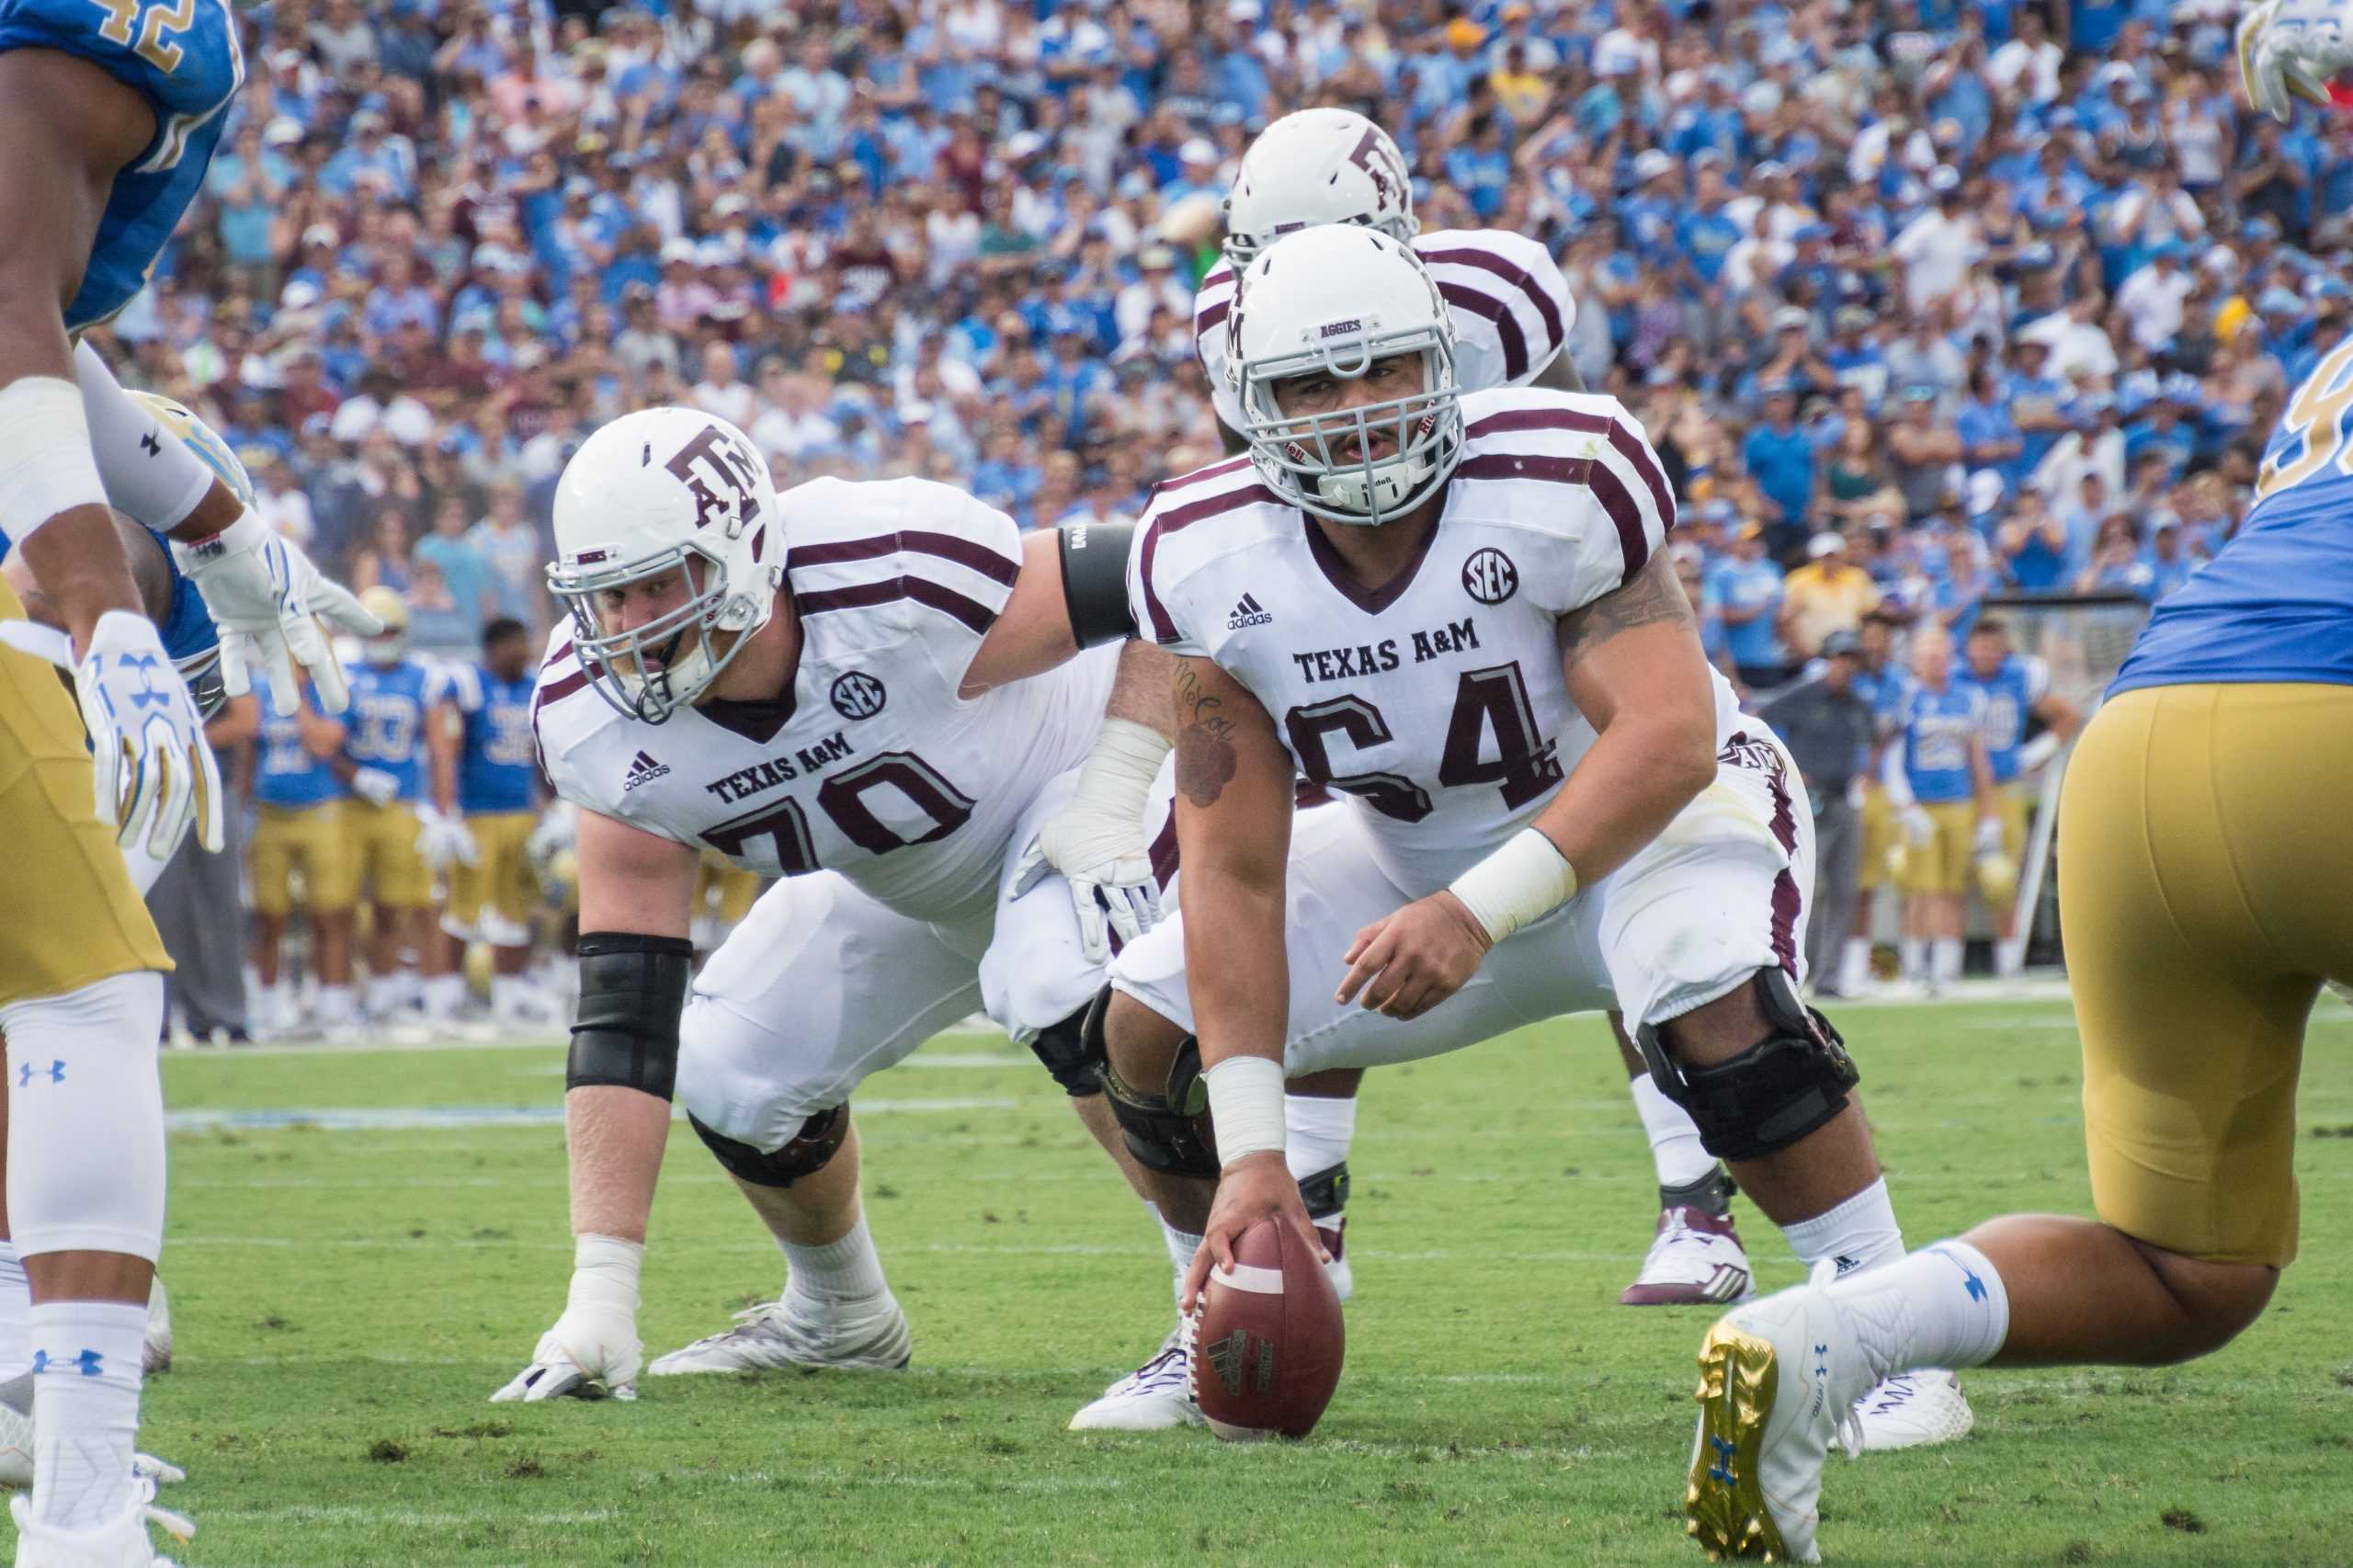 Grading+the+Aggies%3A+from+the+season+opener+to+the+off+week